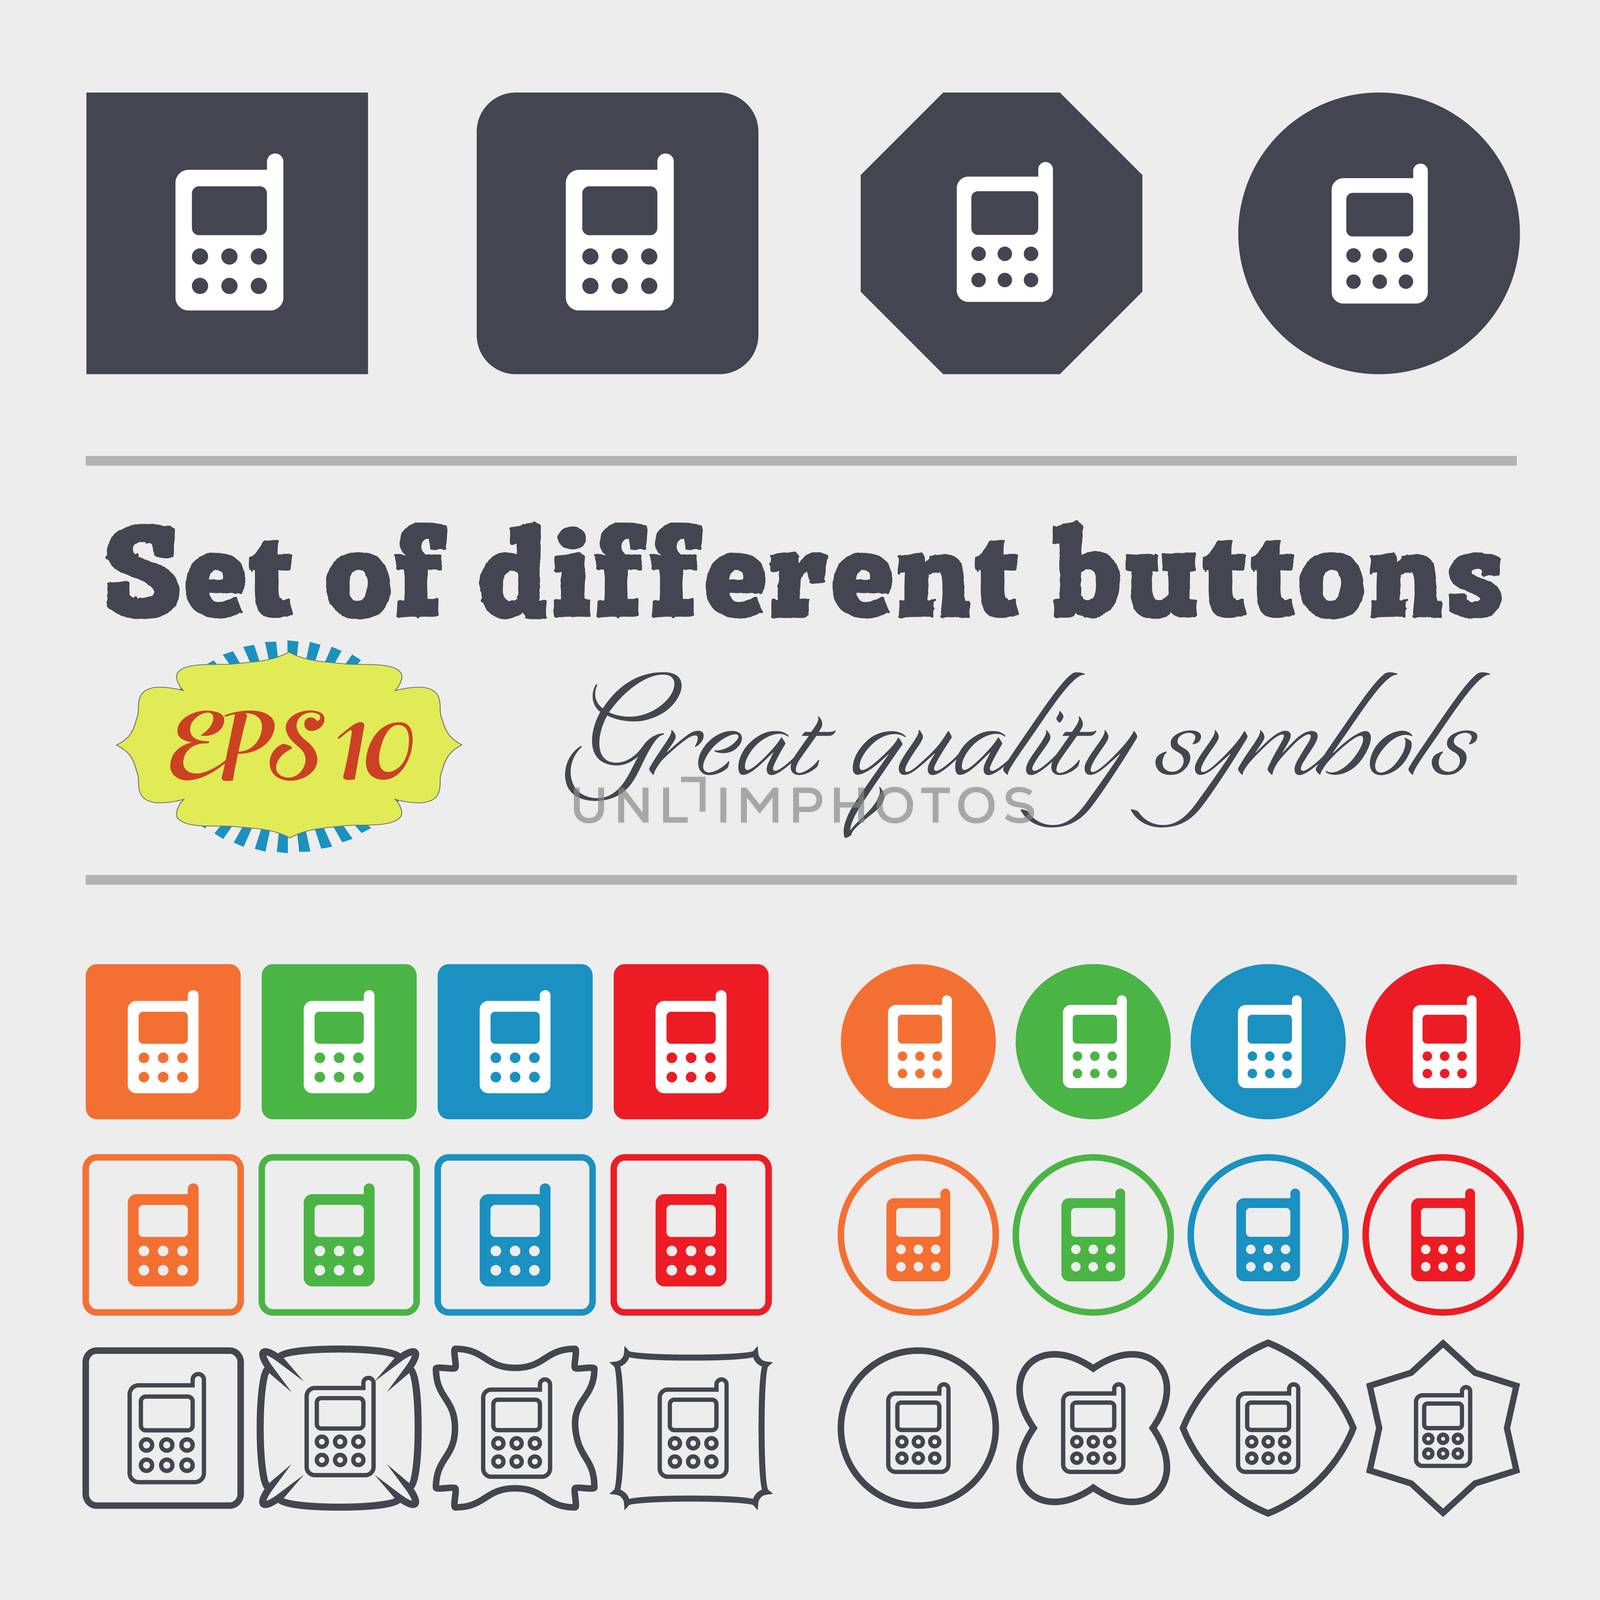 mobile phone icon sign. Big set of colorful, diverse, high-quality buttons. illustration